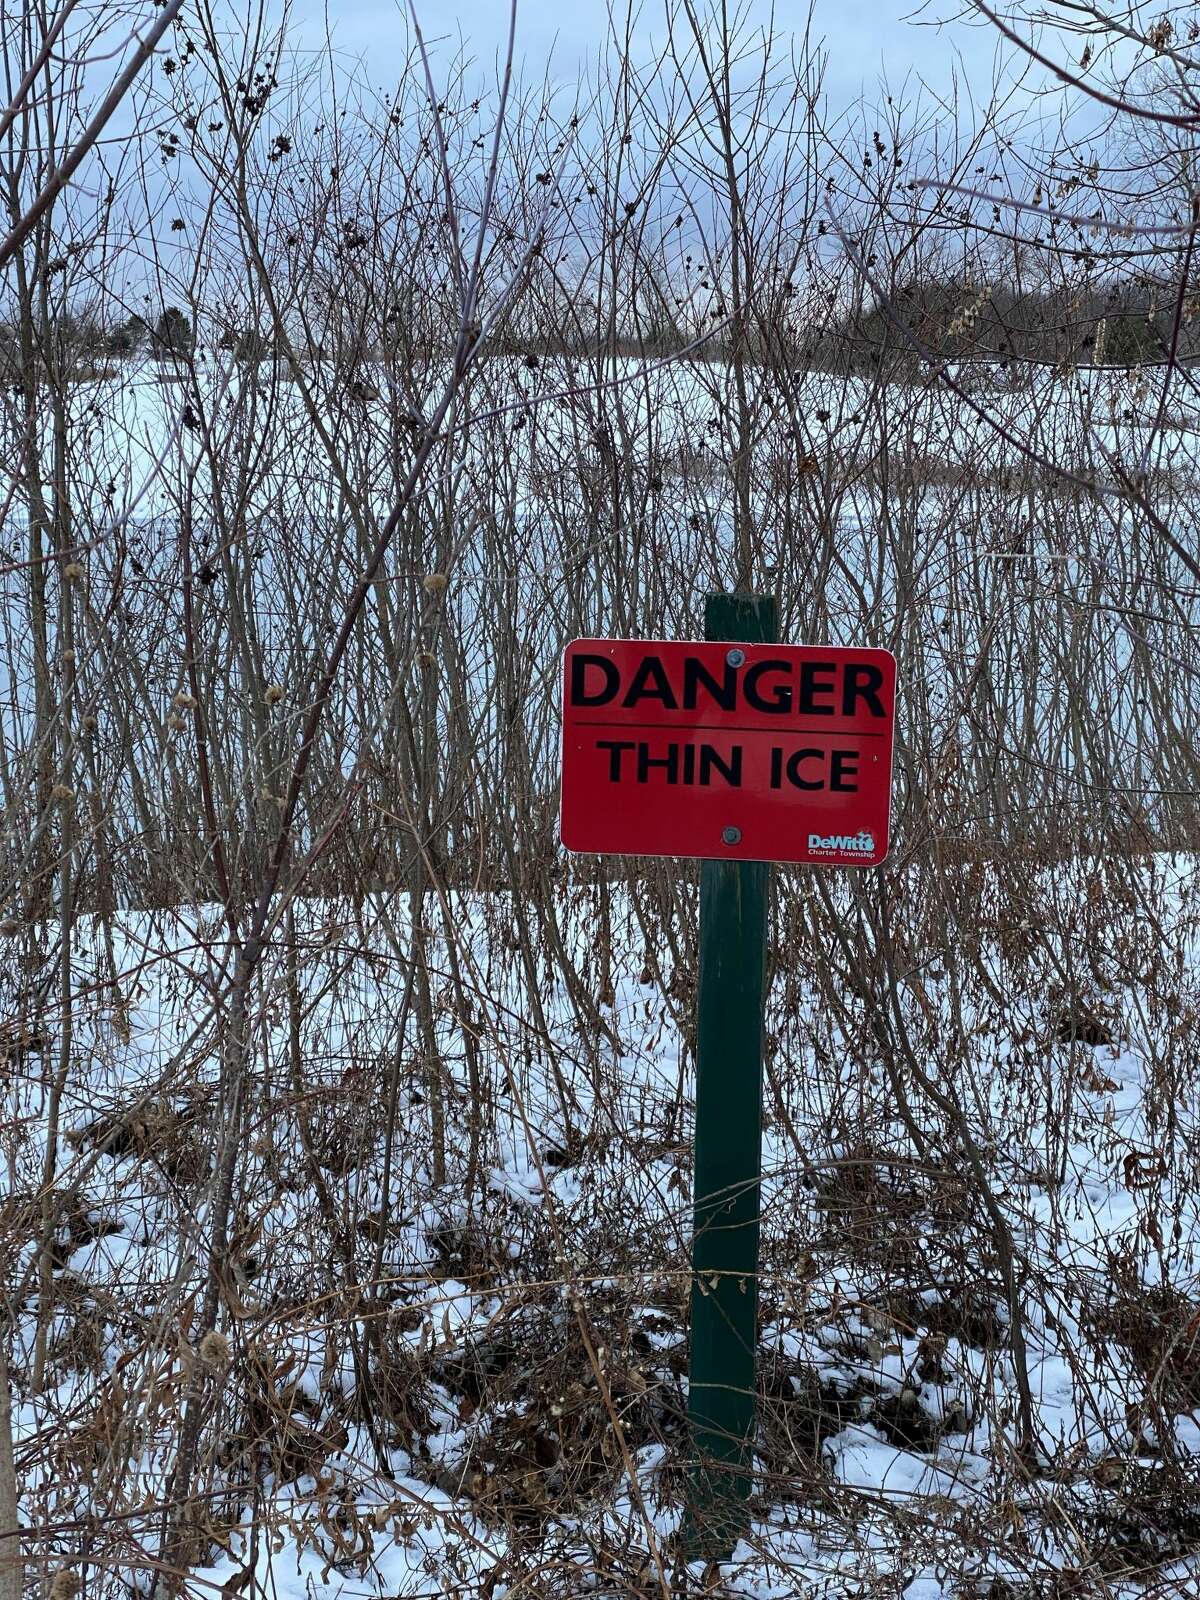 When on or near ice, always use extreme caution because there is no reliable way to test ice thickness. For more safety tips, including what to do if you fall through the ice, go to Michigan.gov/IceSafety.